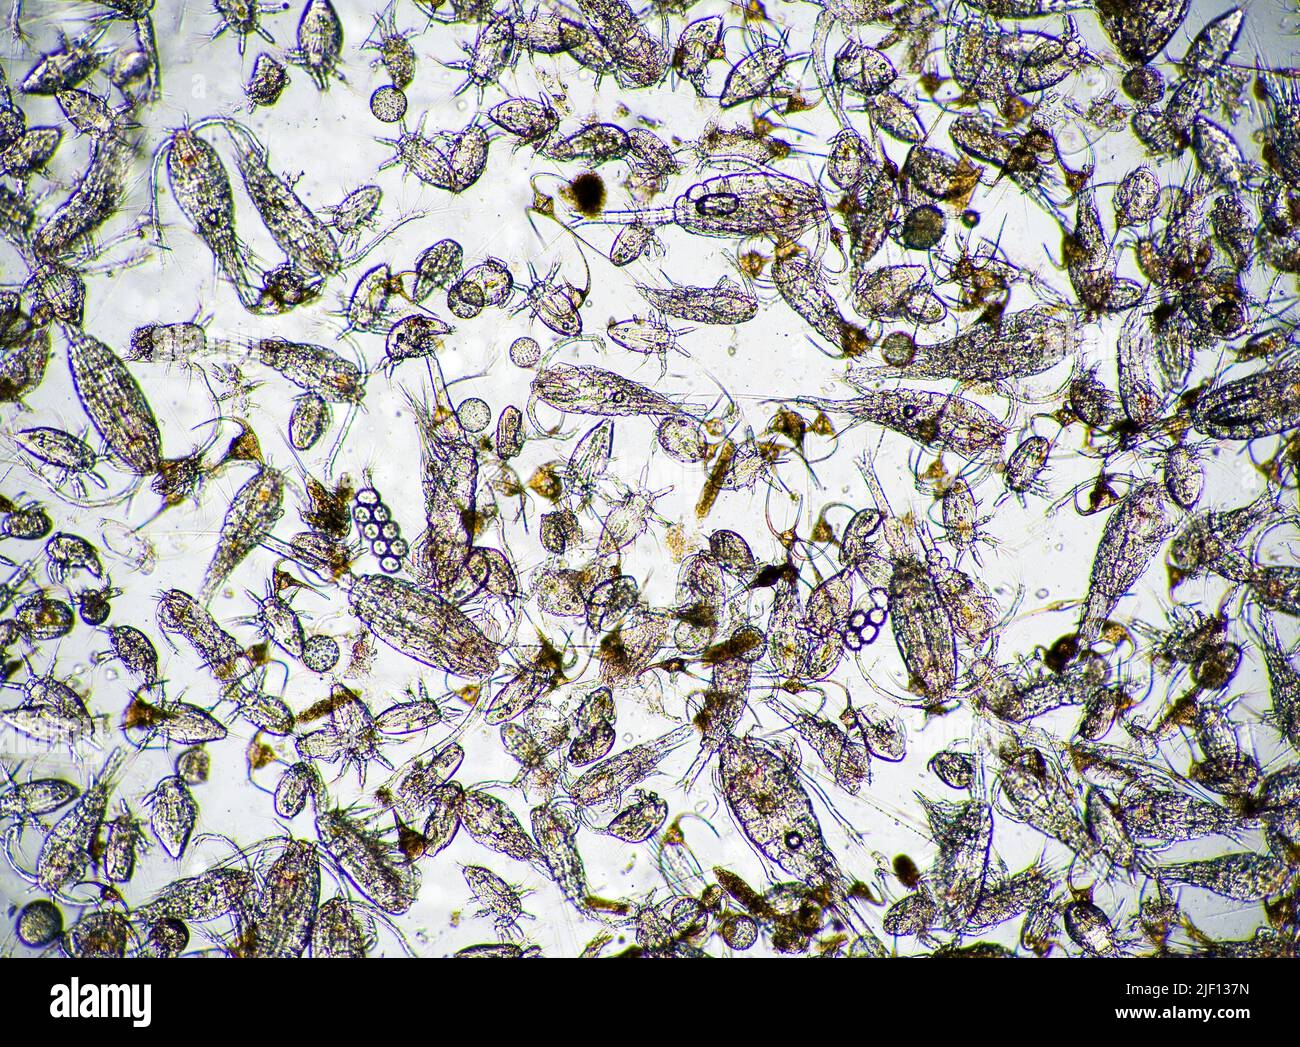 Diverse marine plancton sample from south-western Norway in August. Stock Photo